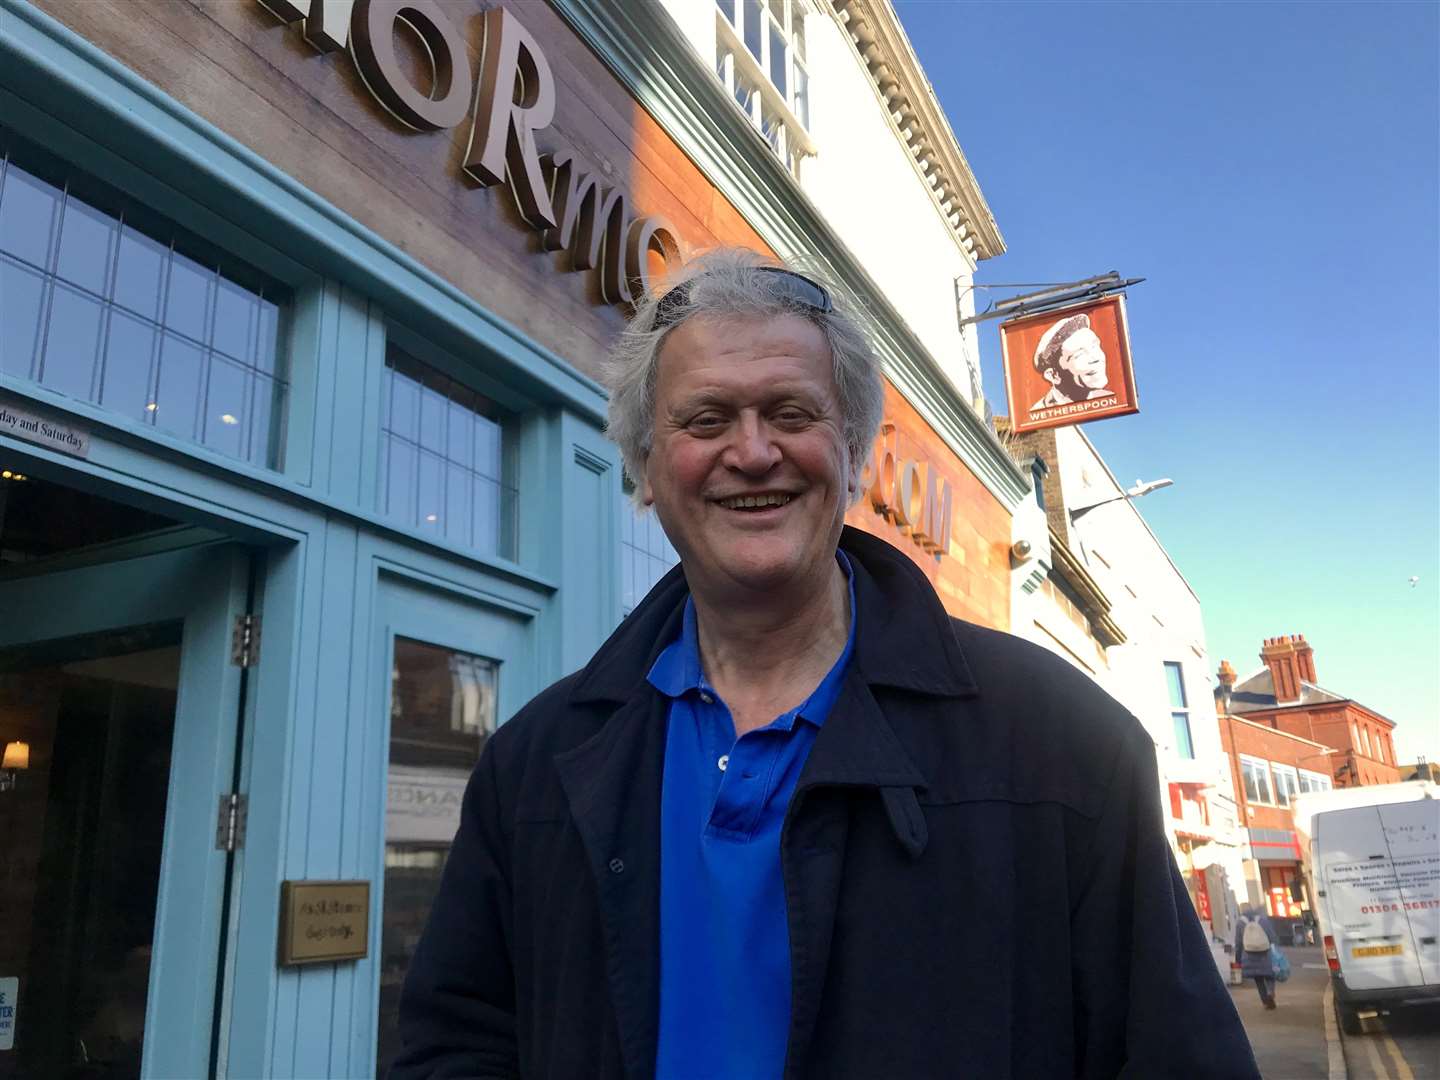 JD Wetherspoon founder and chairman Tim Martin outside Sir Norman Wisdom in Deal